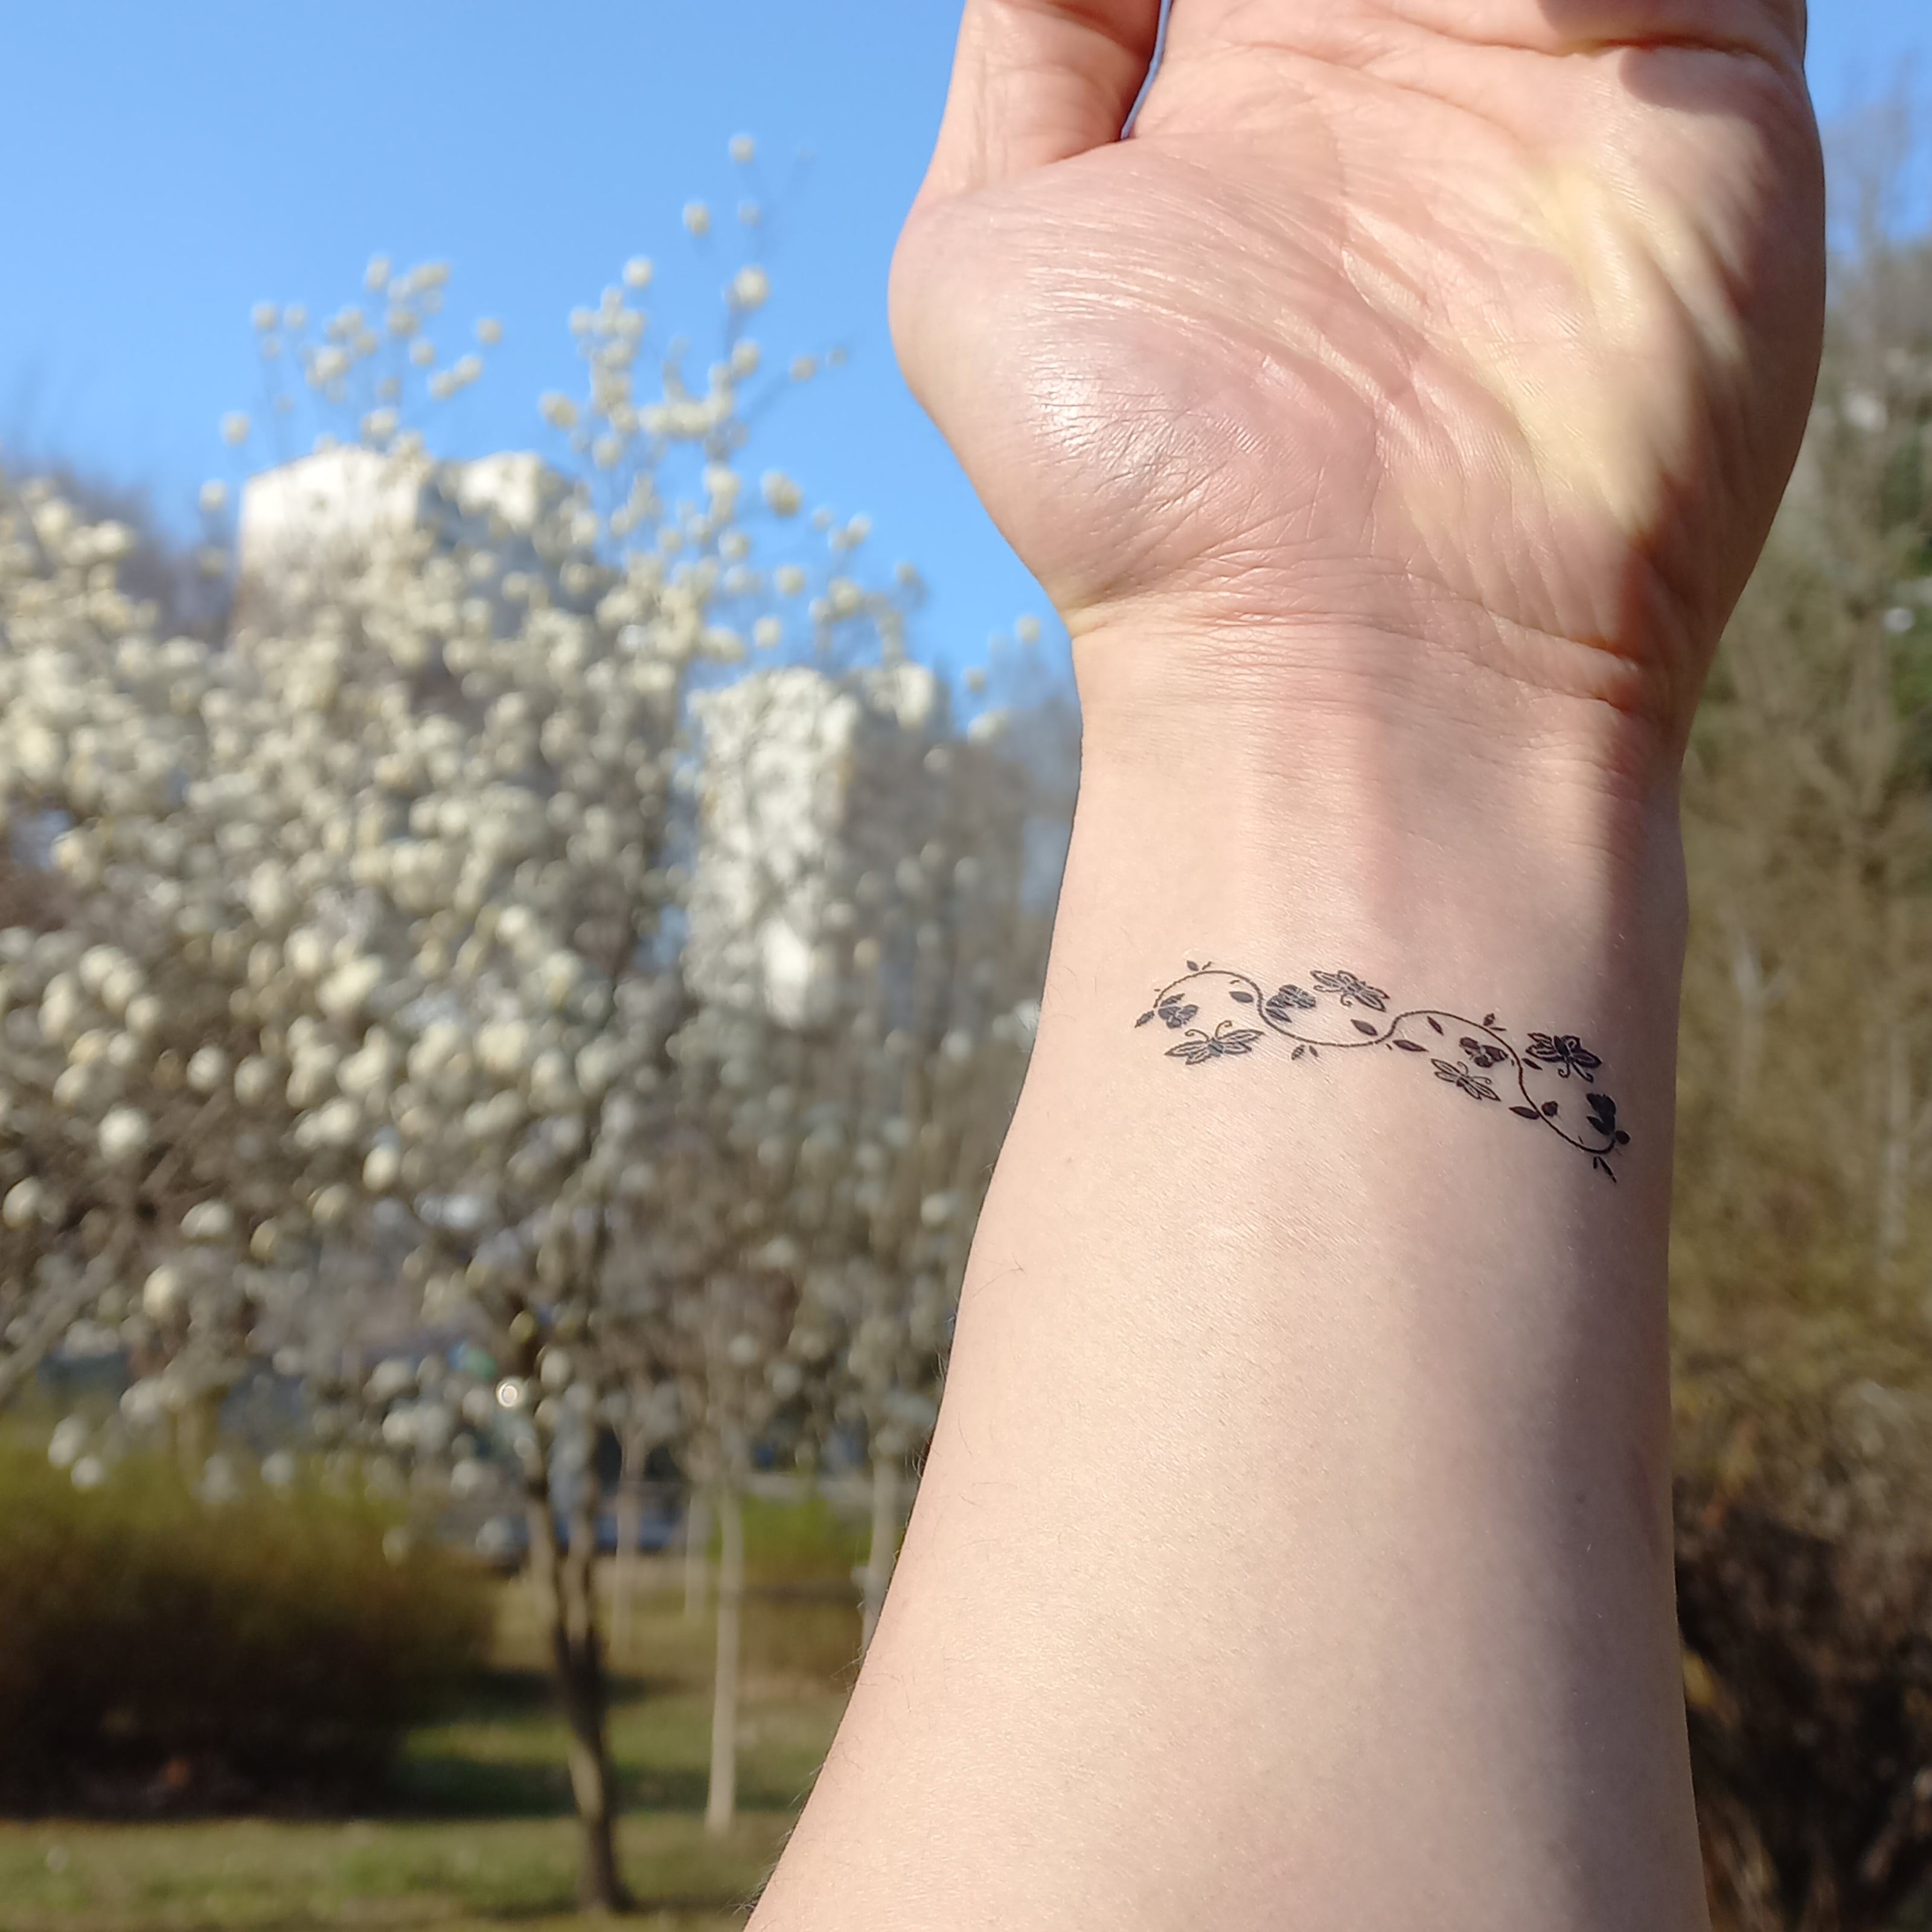 A wrist adorned with a delicate floral temporary tattoo, with blooming trees in the background, symbolizing spring.